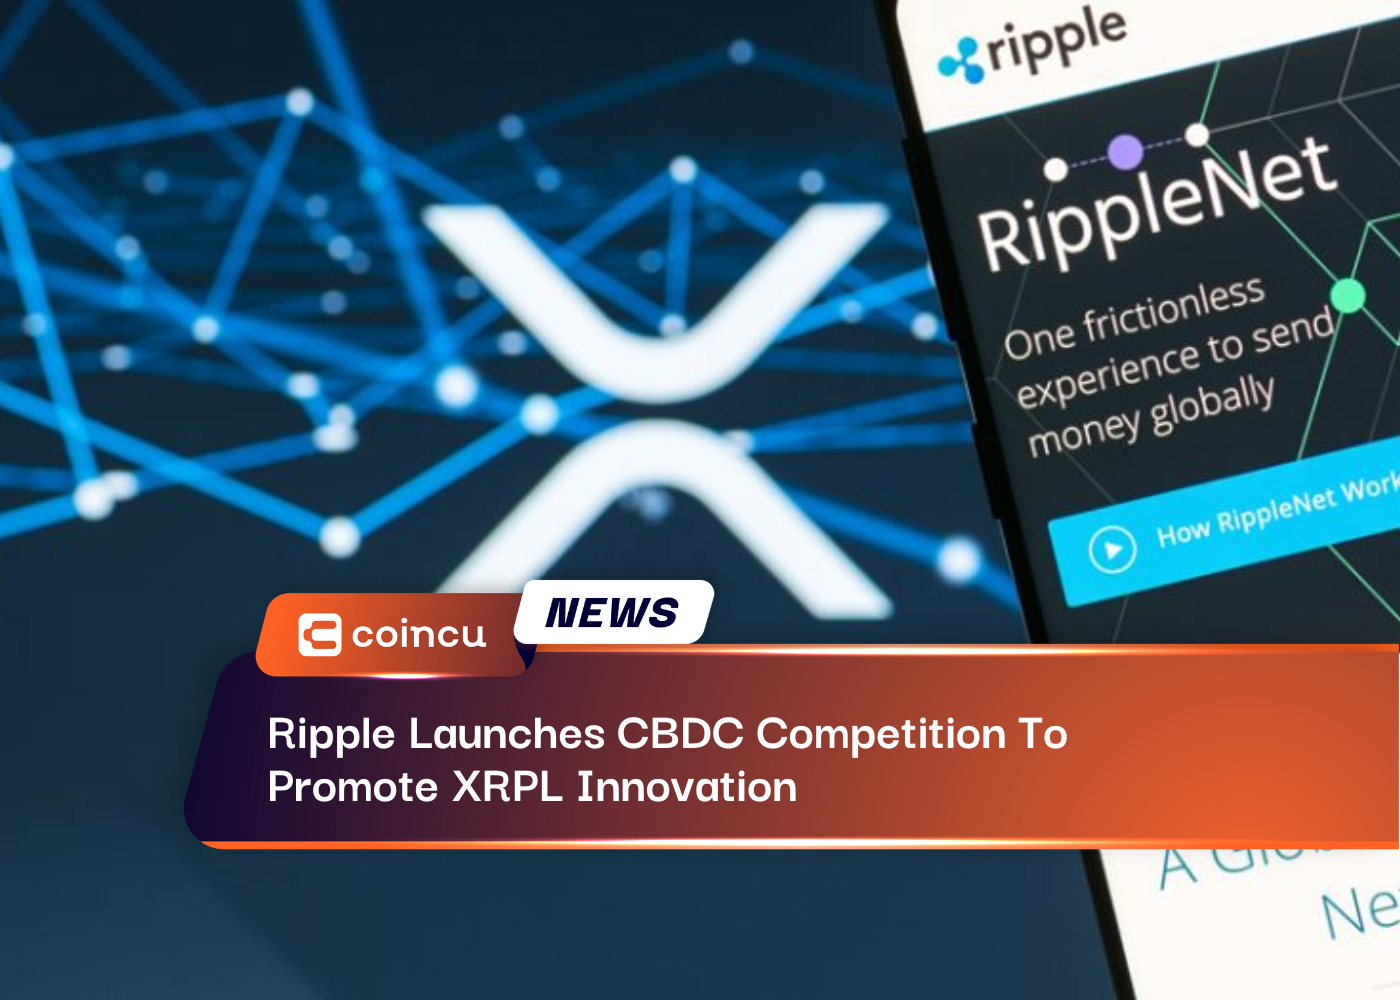 Ripple Launches CBDC Competition to Promote XRPL Innovation